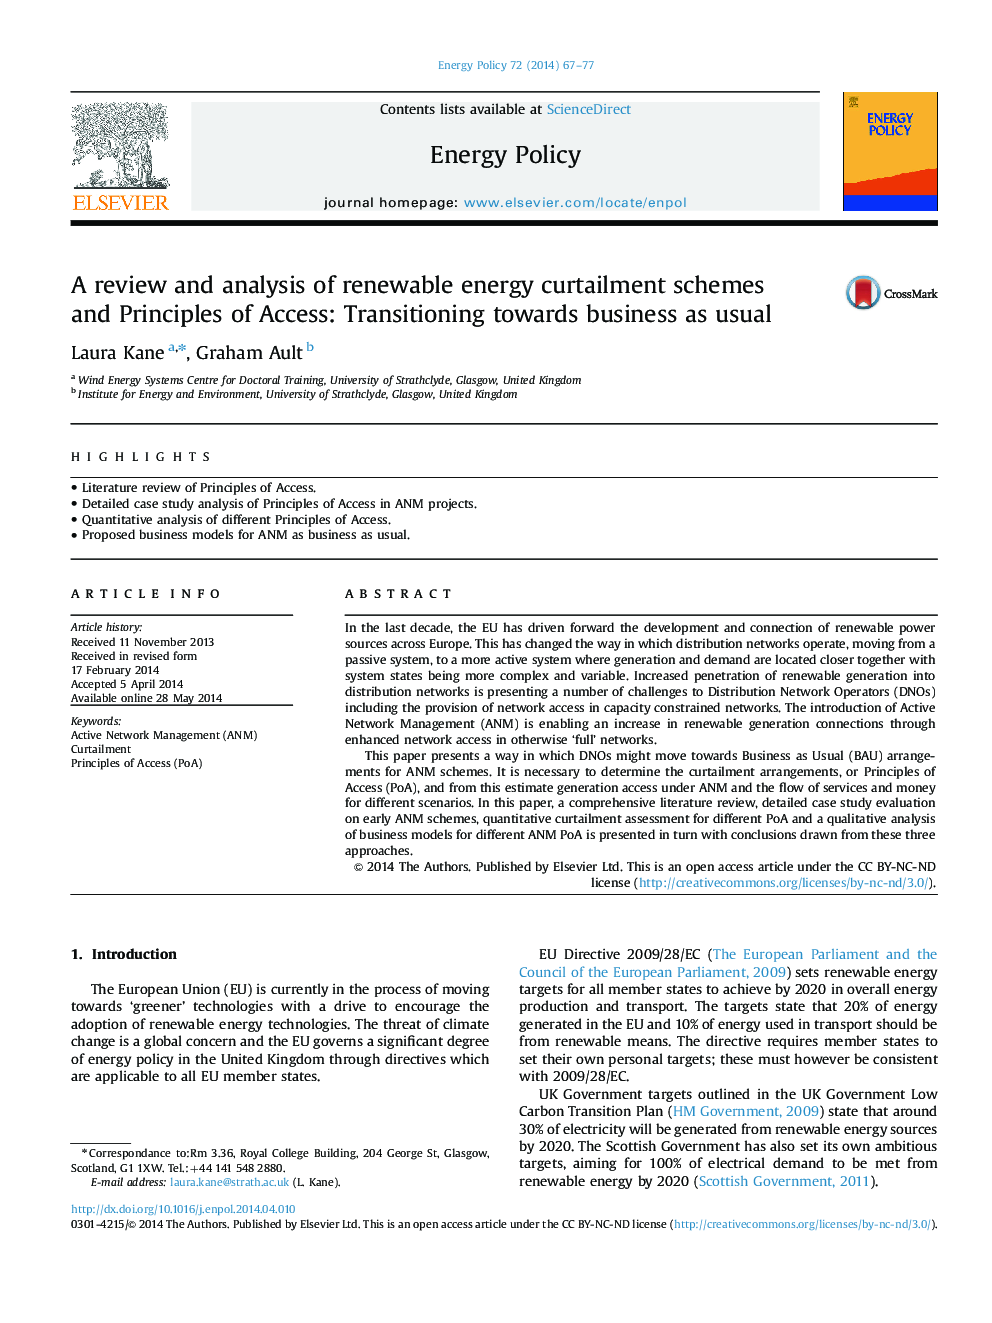 A review and analysis of renewable energy curtailment schemes and Principles of Access: Transitioning towards business as usual